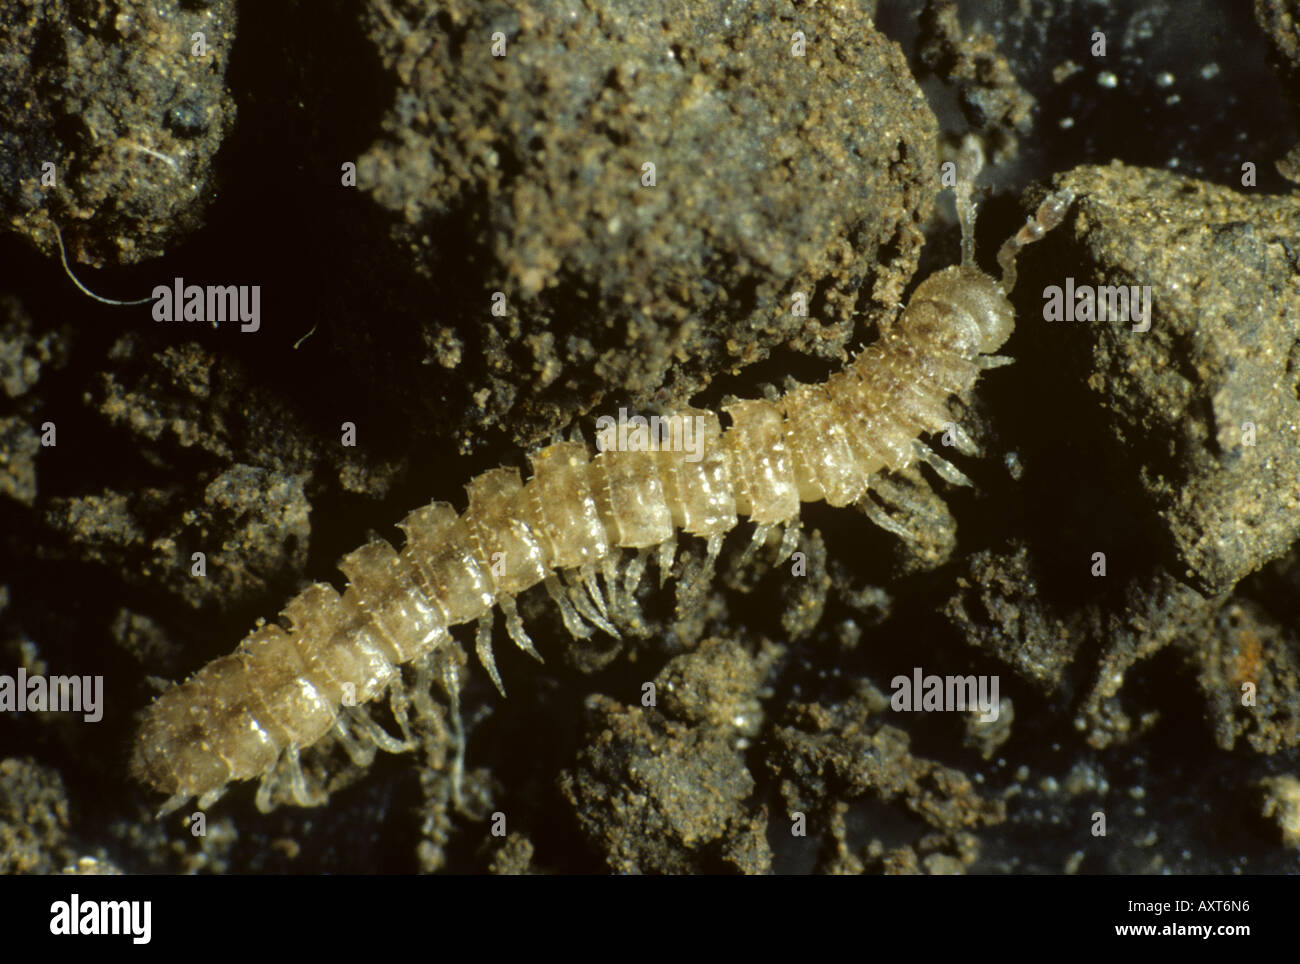 Flat backed millipede Polydesmus angustus adult soil pest on soil Stock Photo